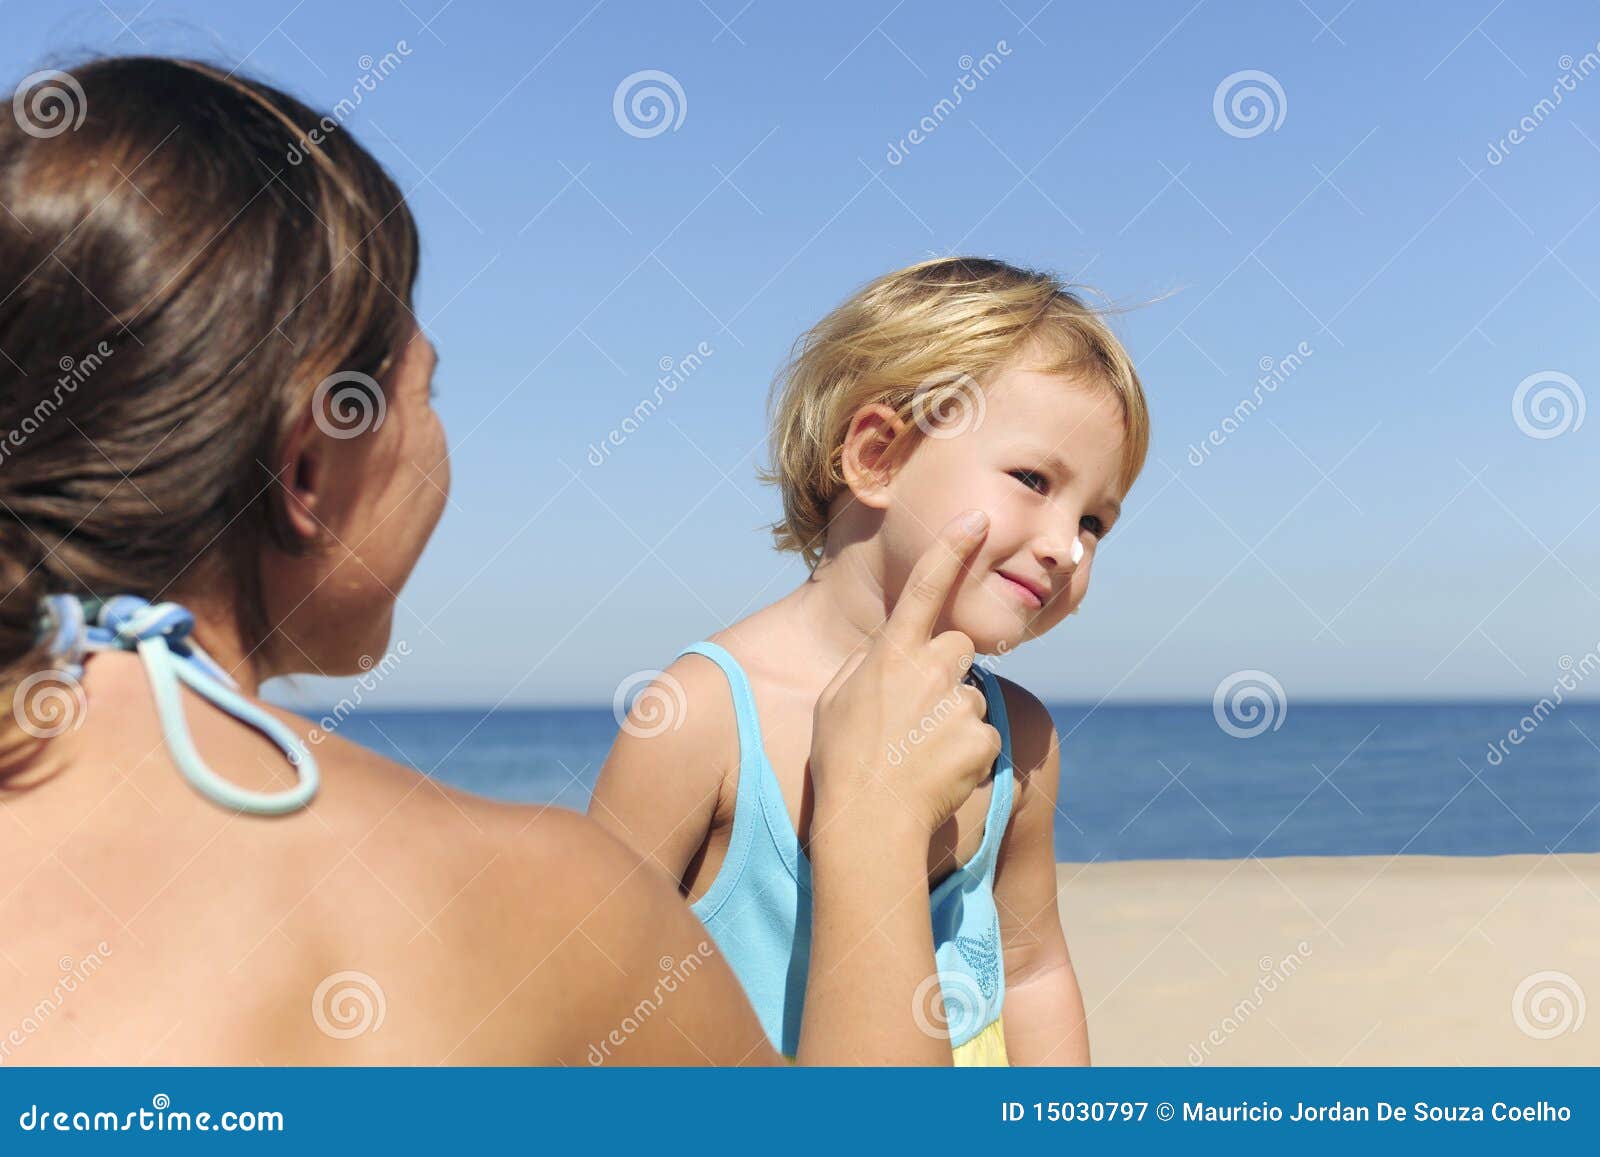 mother applying suntan lotion to her daughter